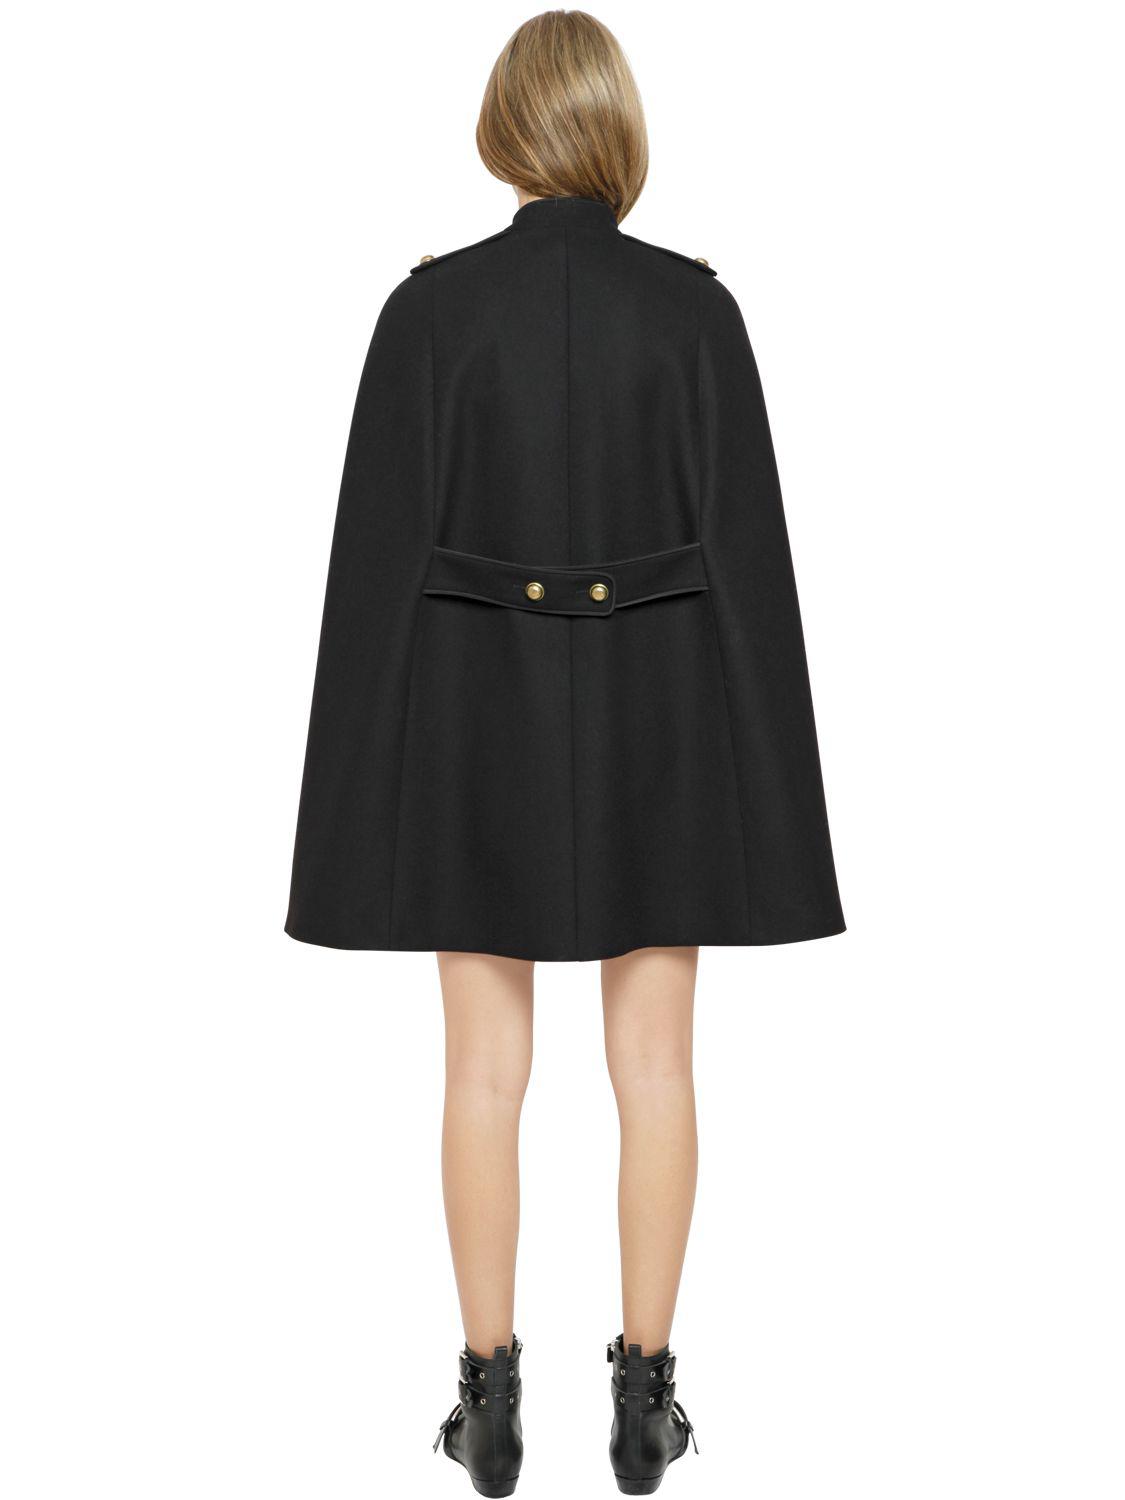 RED Valentino Wool Cloth Military Cape in Black - Lyst